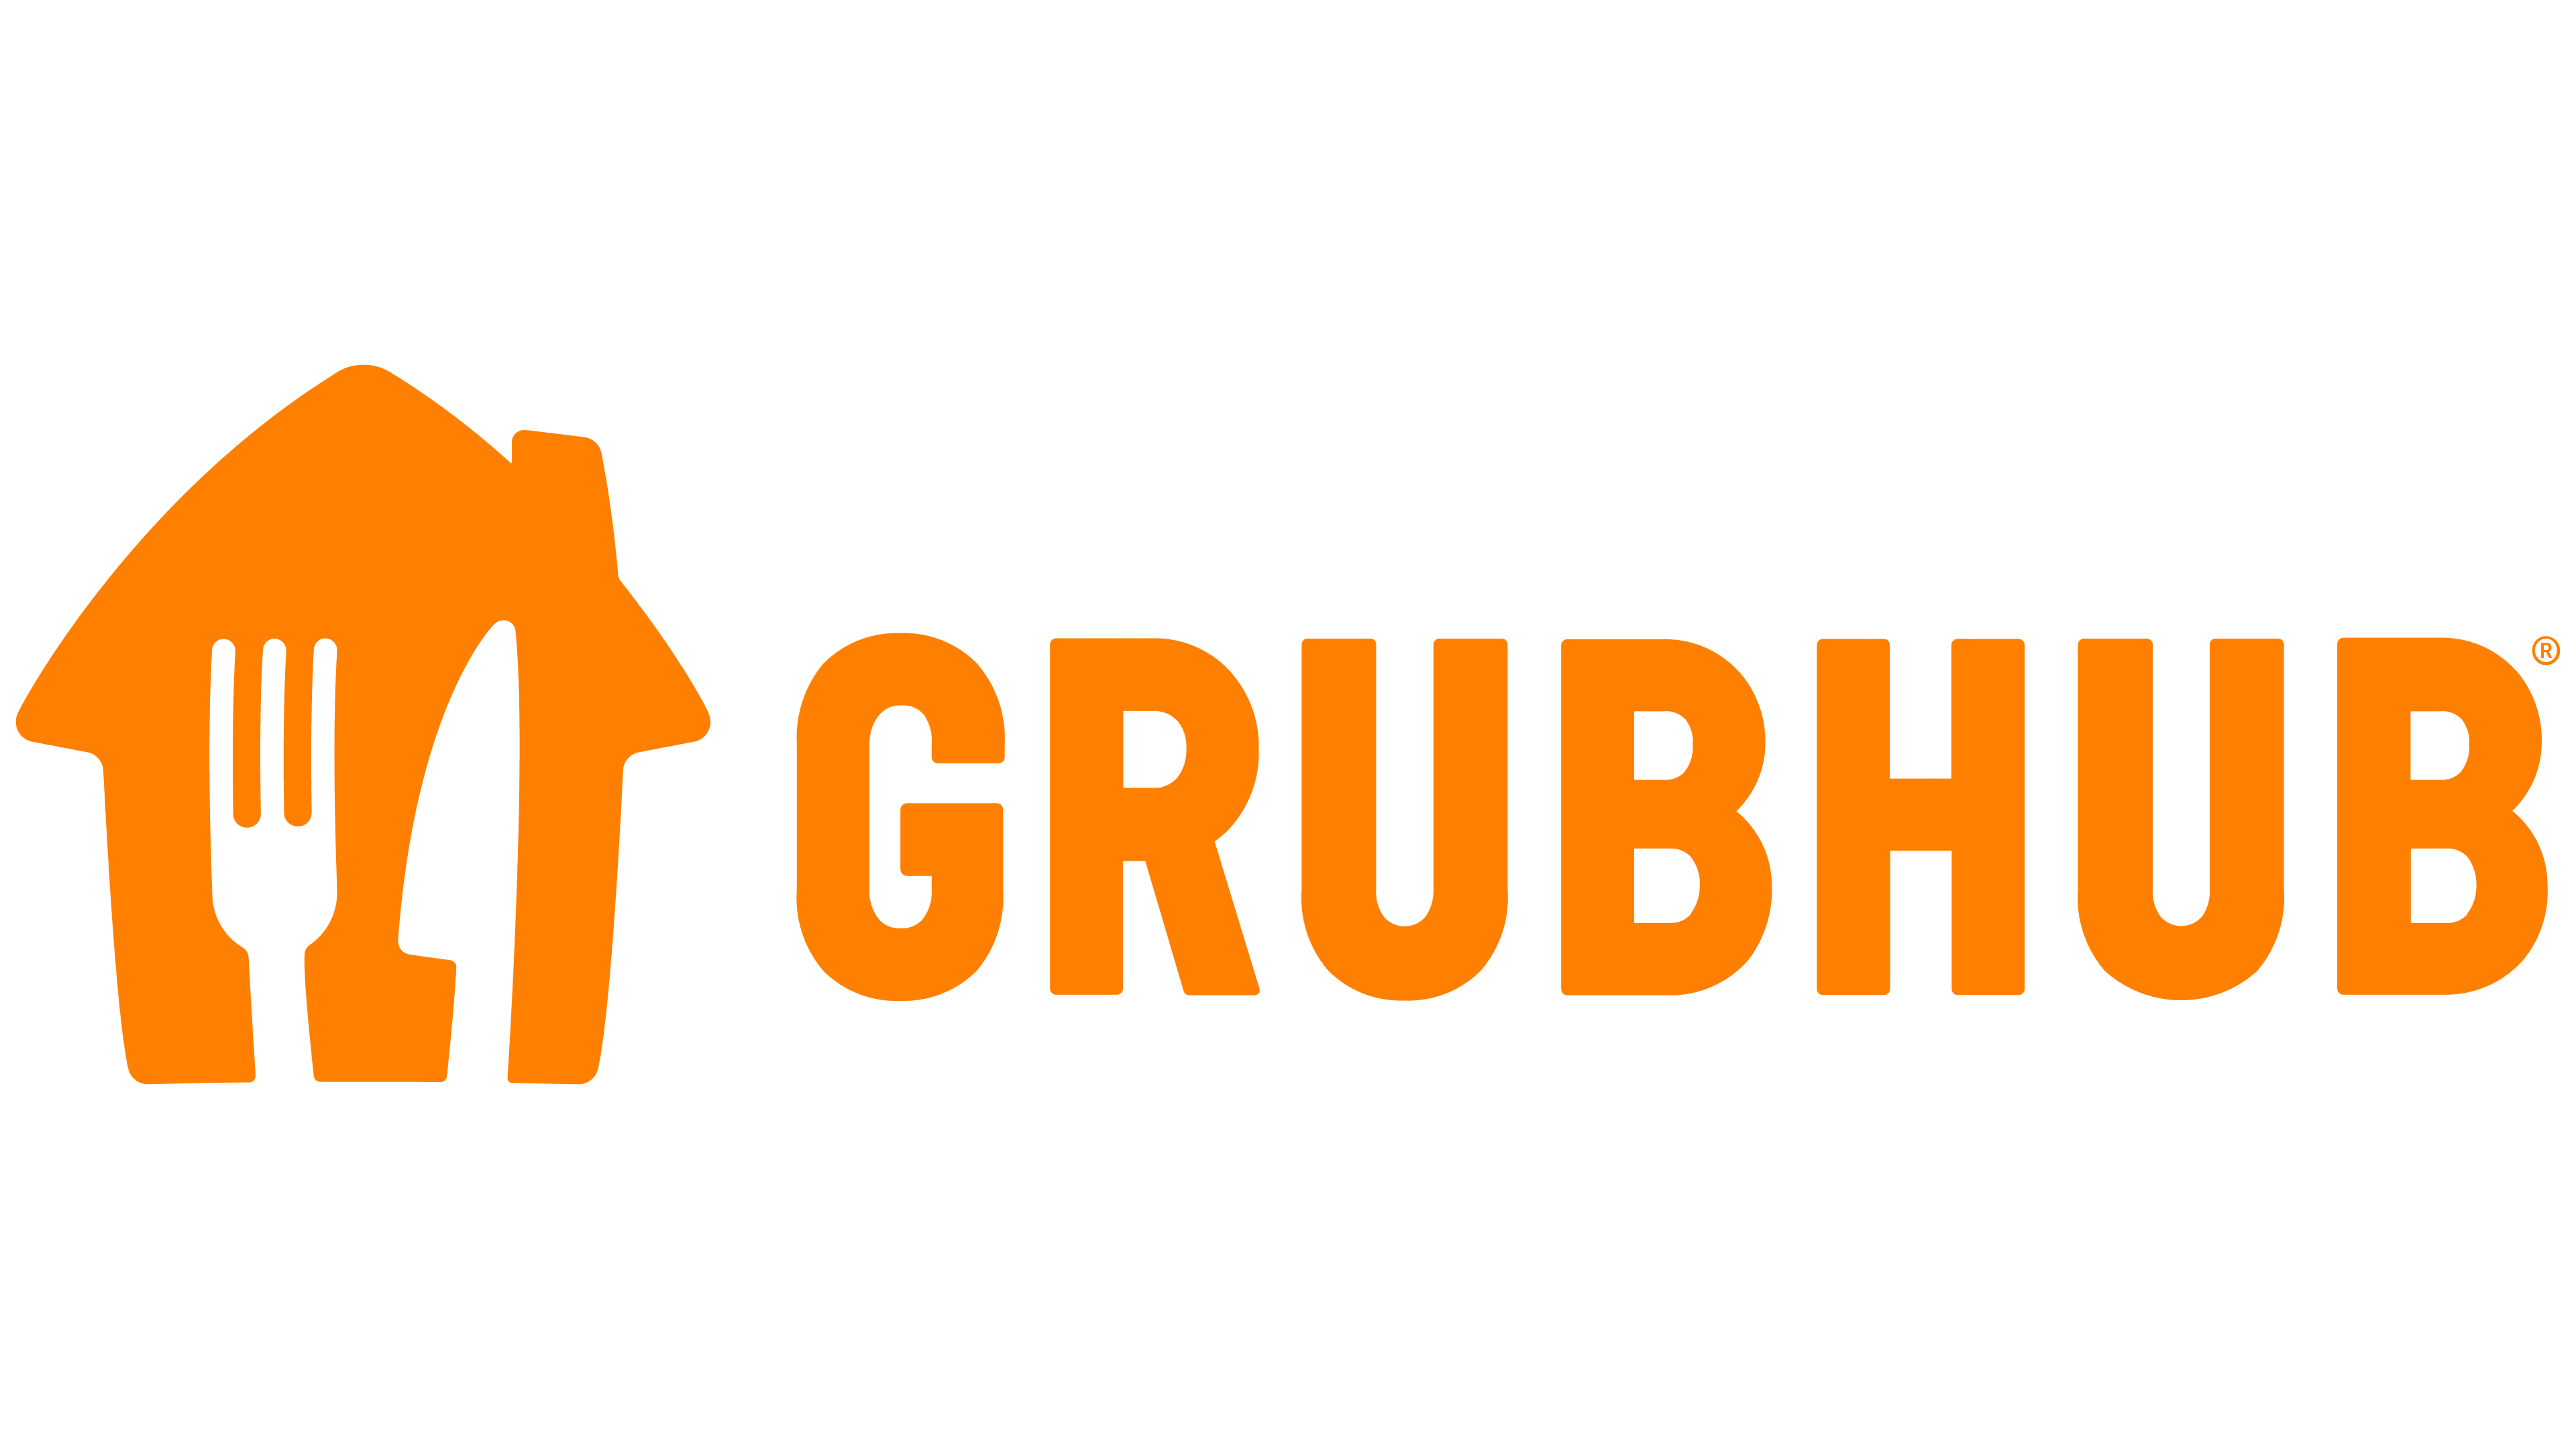 Great American Creamery Delivers with Grubhub image